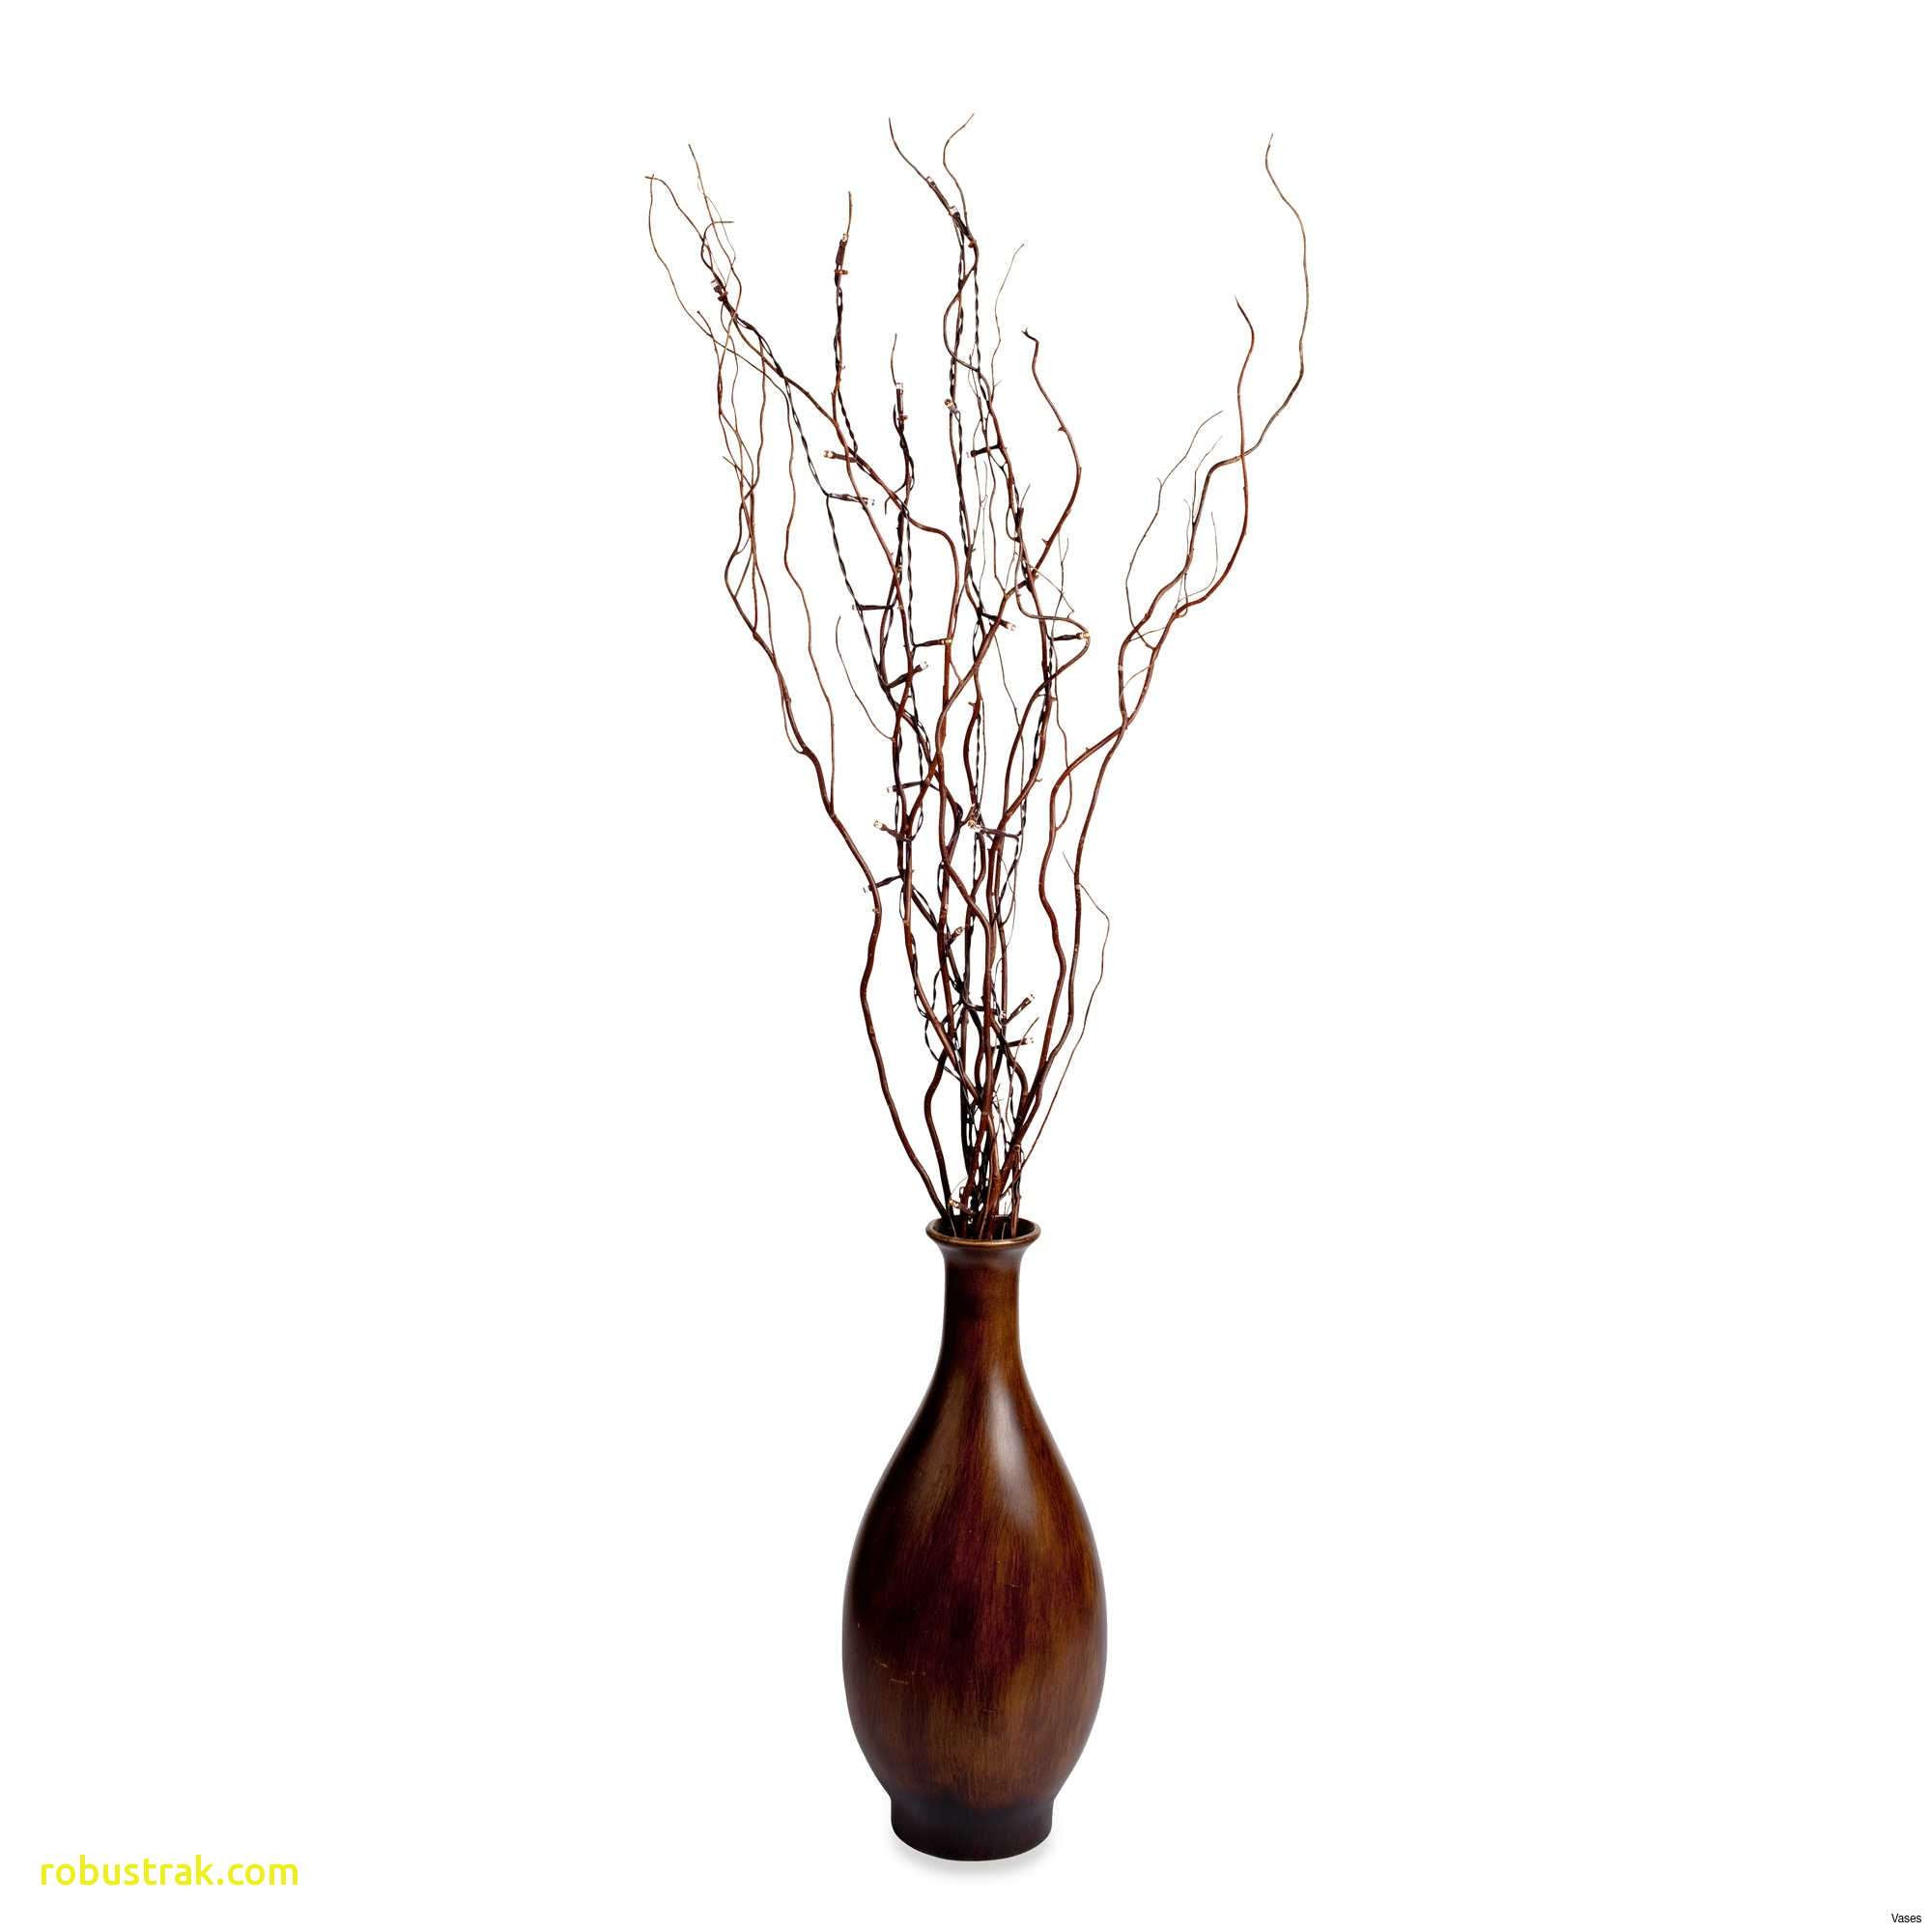 black decorative vases of inspirational decor sticks in a vase home design ideas inside brown lighted branches matched with home accessories ideas vase sticks luxury standing tableh vases decorative in